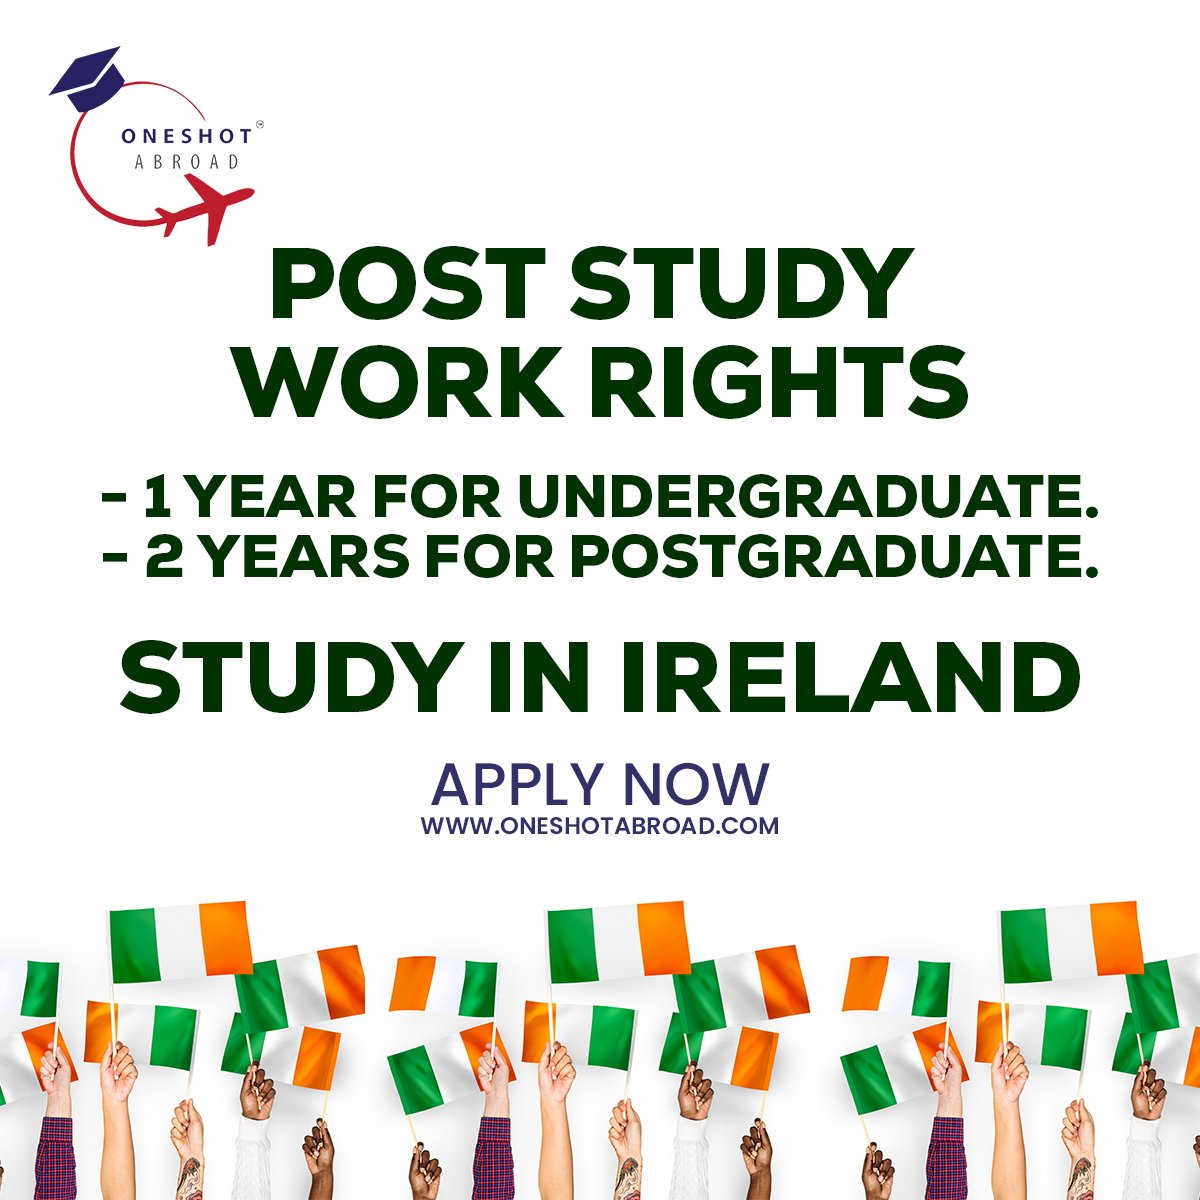 Do you want more Study + Work Rights in abroad ?
Study in Ireland!
Enroll Now @oneshotabroad
#studyincanada #studyinuk #studyinusa #studyinaustralia #studyinireland #studyabroad #expertcounsellor  #studyabroadconsultants #education #ireland #education #workinireland